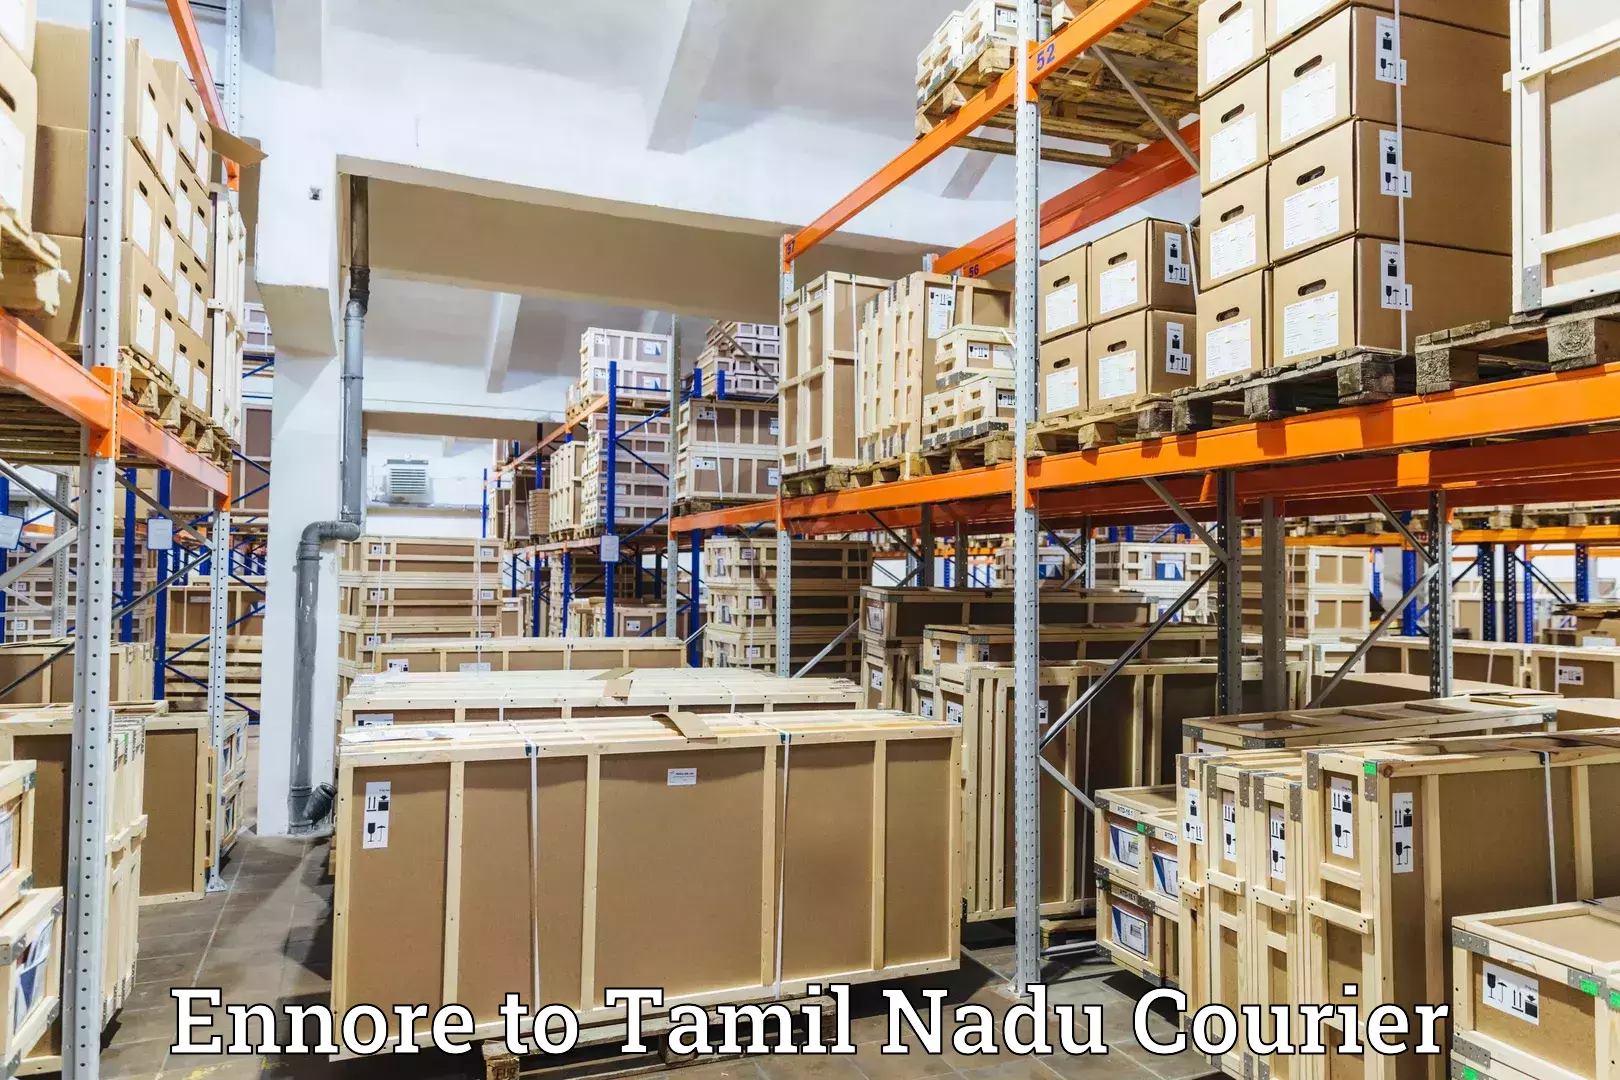 Flexible delivery schedules in Ennore to Tindivanam